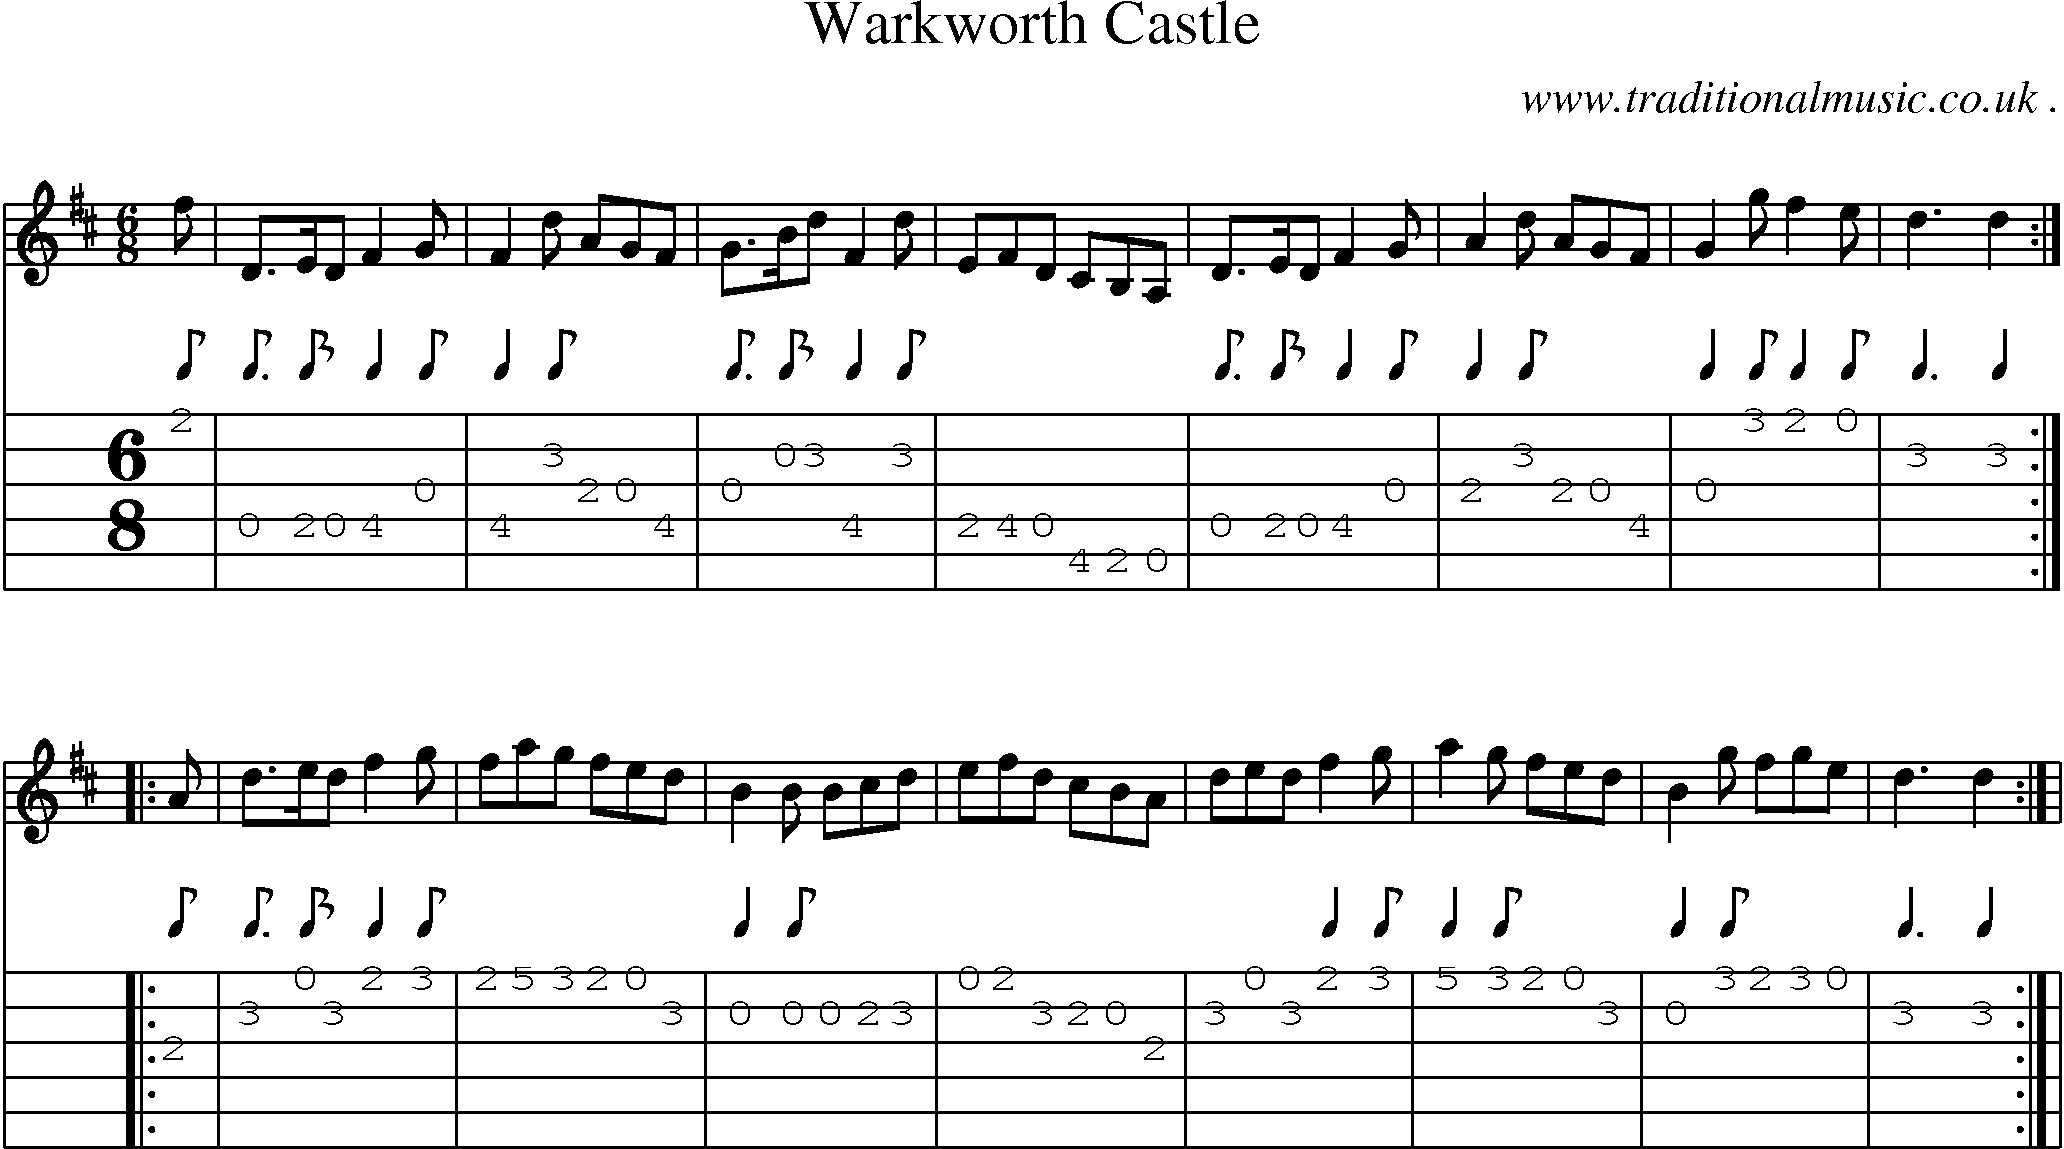 Sheet-Music and Guitar Tabs for Warkworth Castle